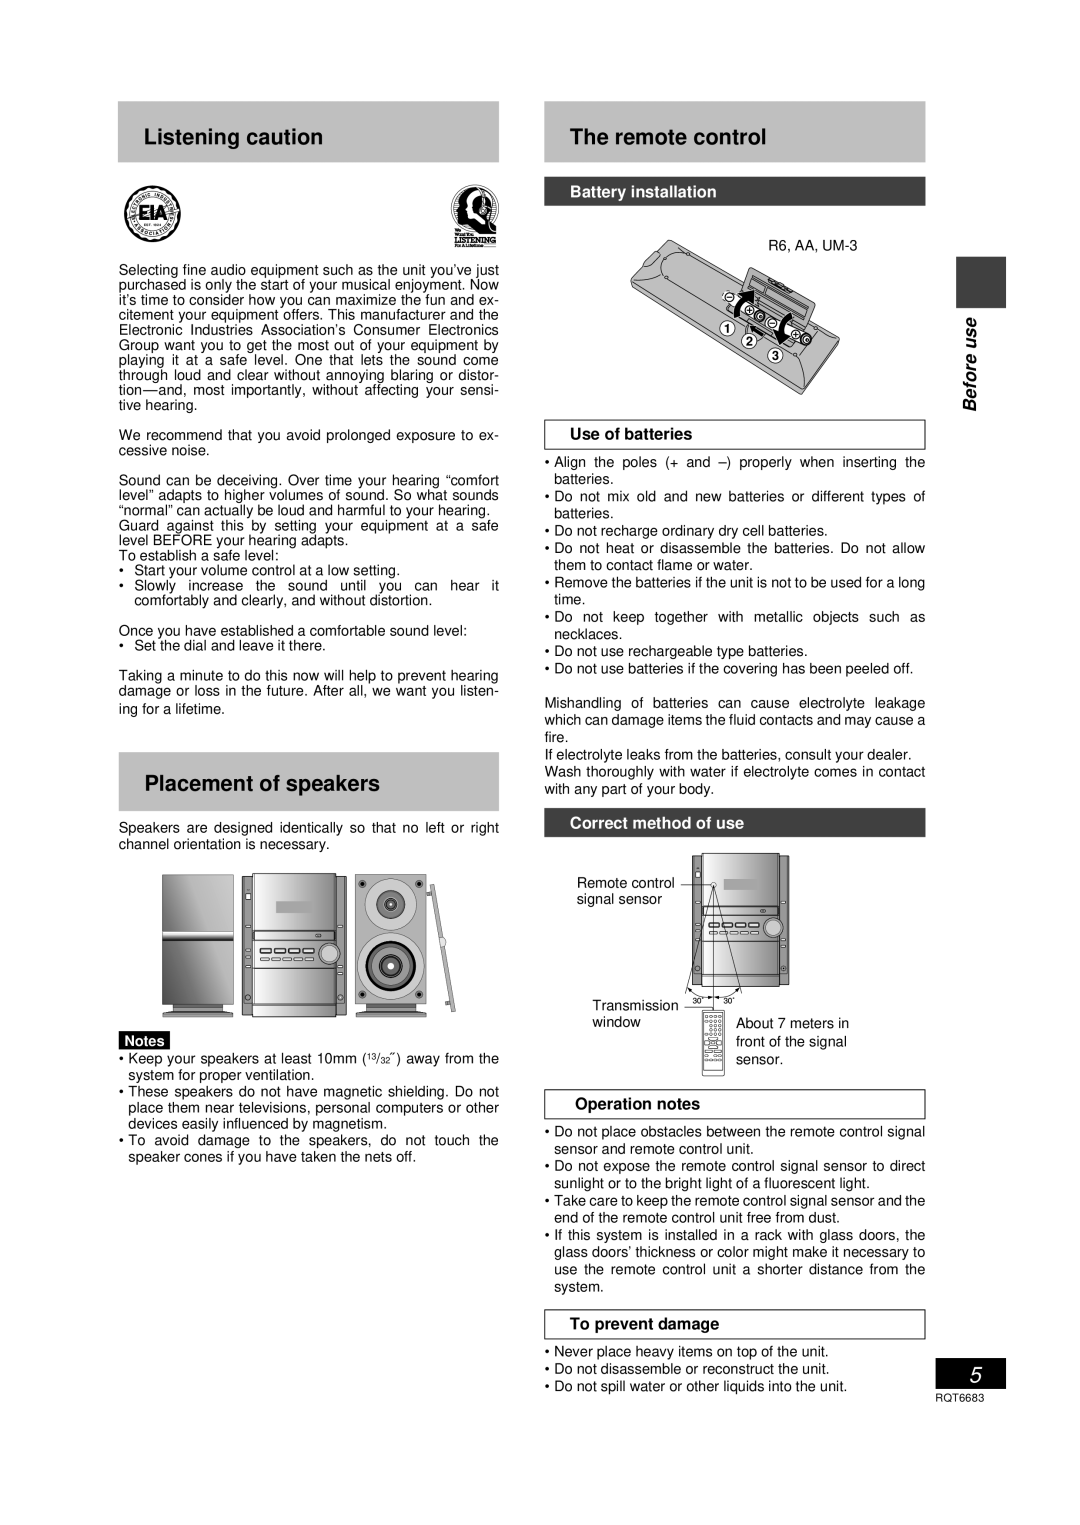 Panasonic SC-PM18 Listening caution, Placement of speakers, The remote control, Battery installation, Use of batteries 